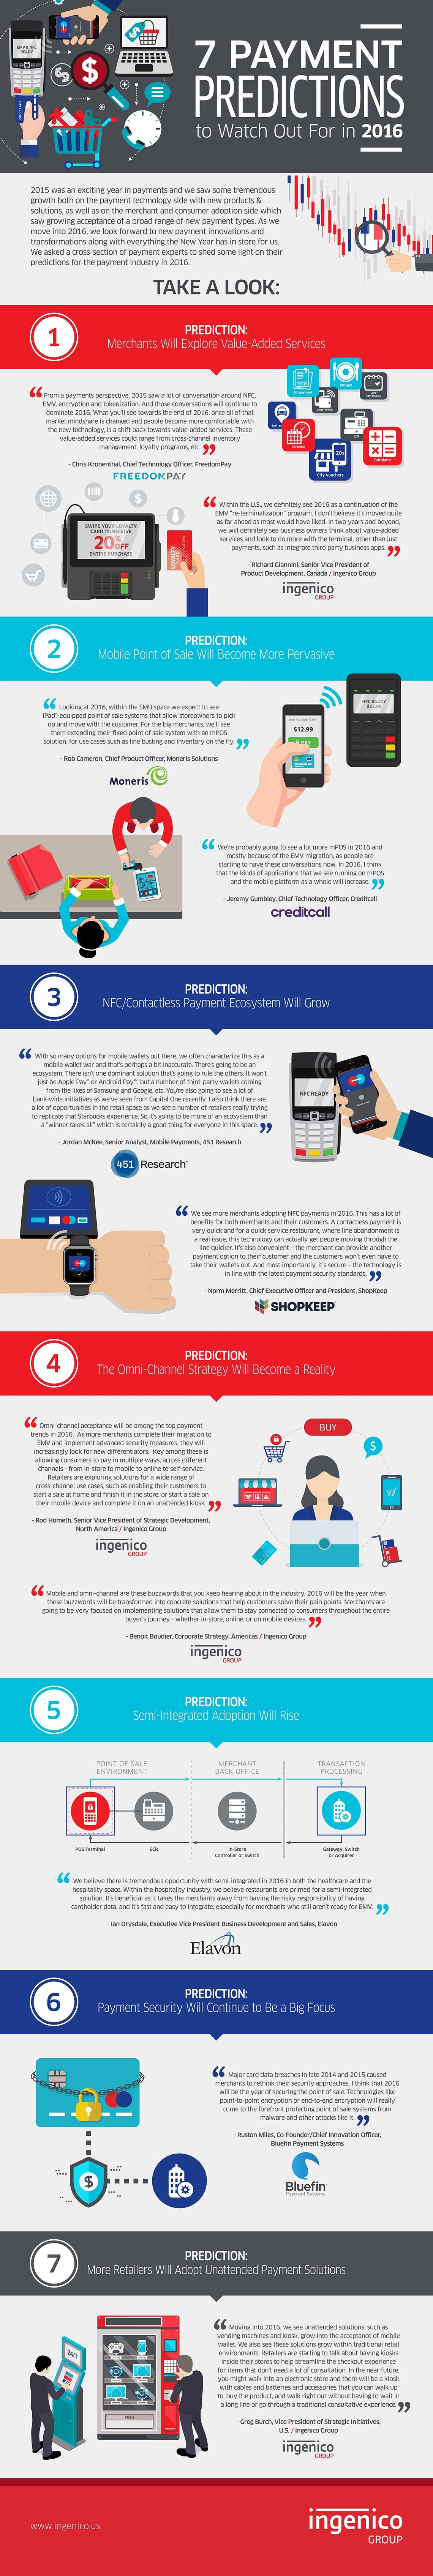 7 Payment Predictions for 2016